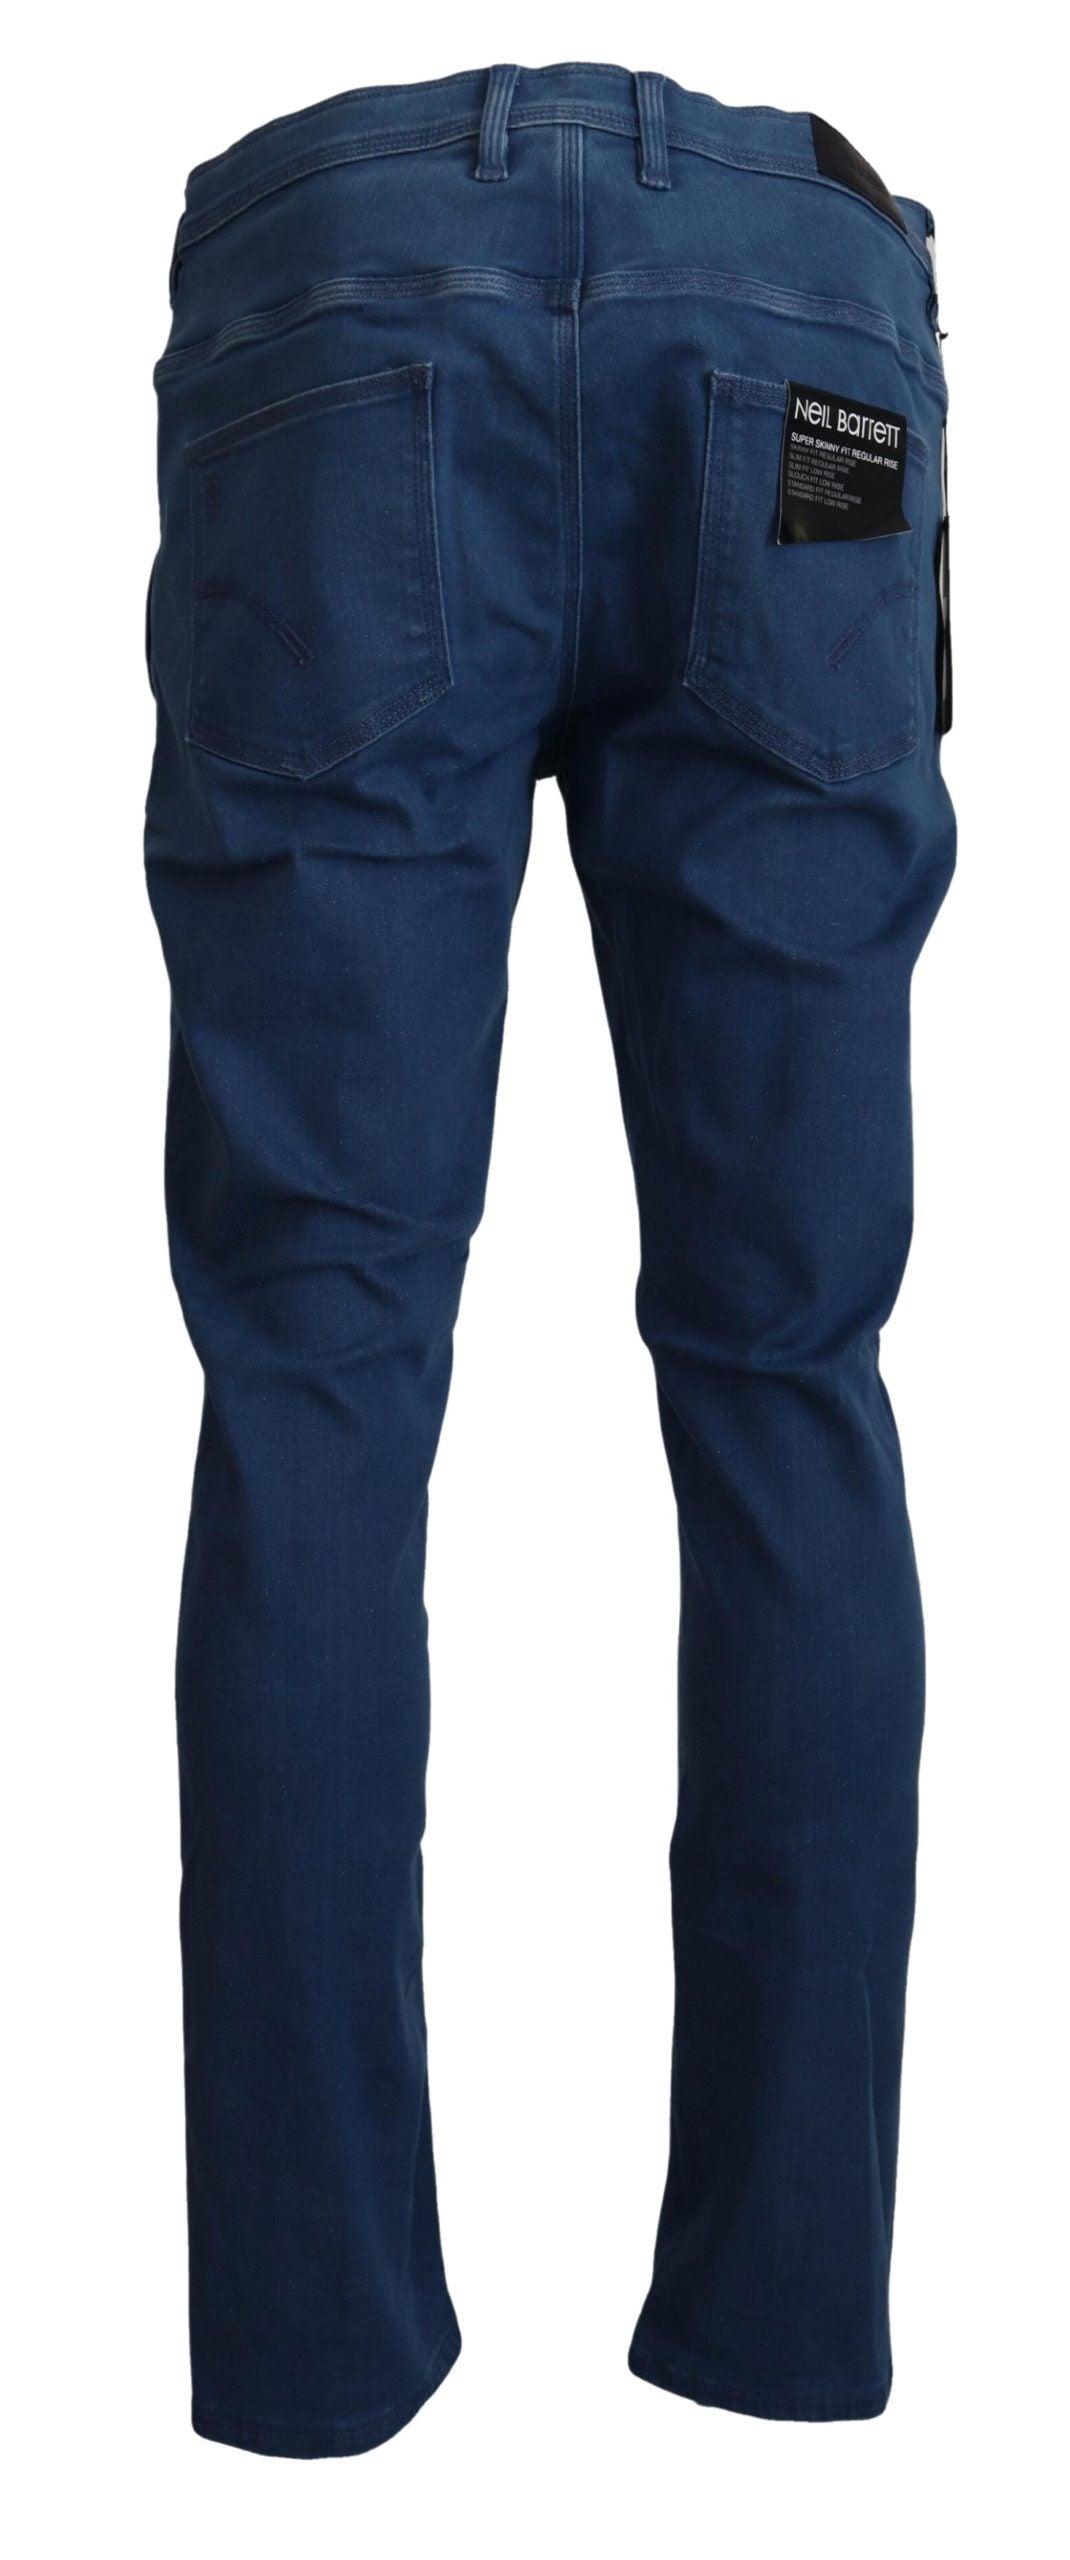 Chic Skinny Blue Pants for a Sharp Look